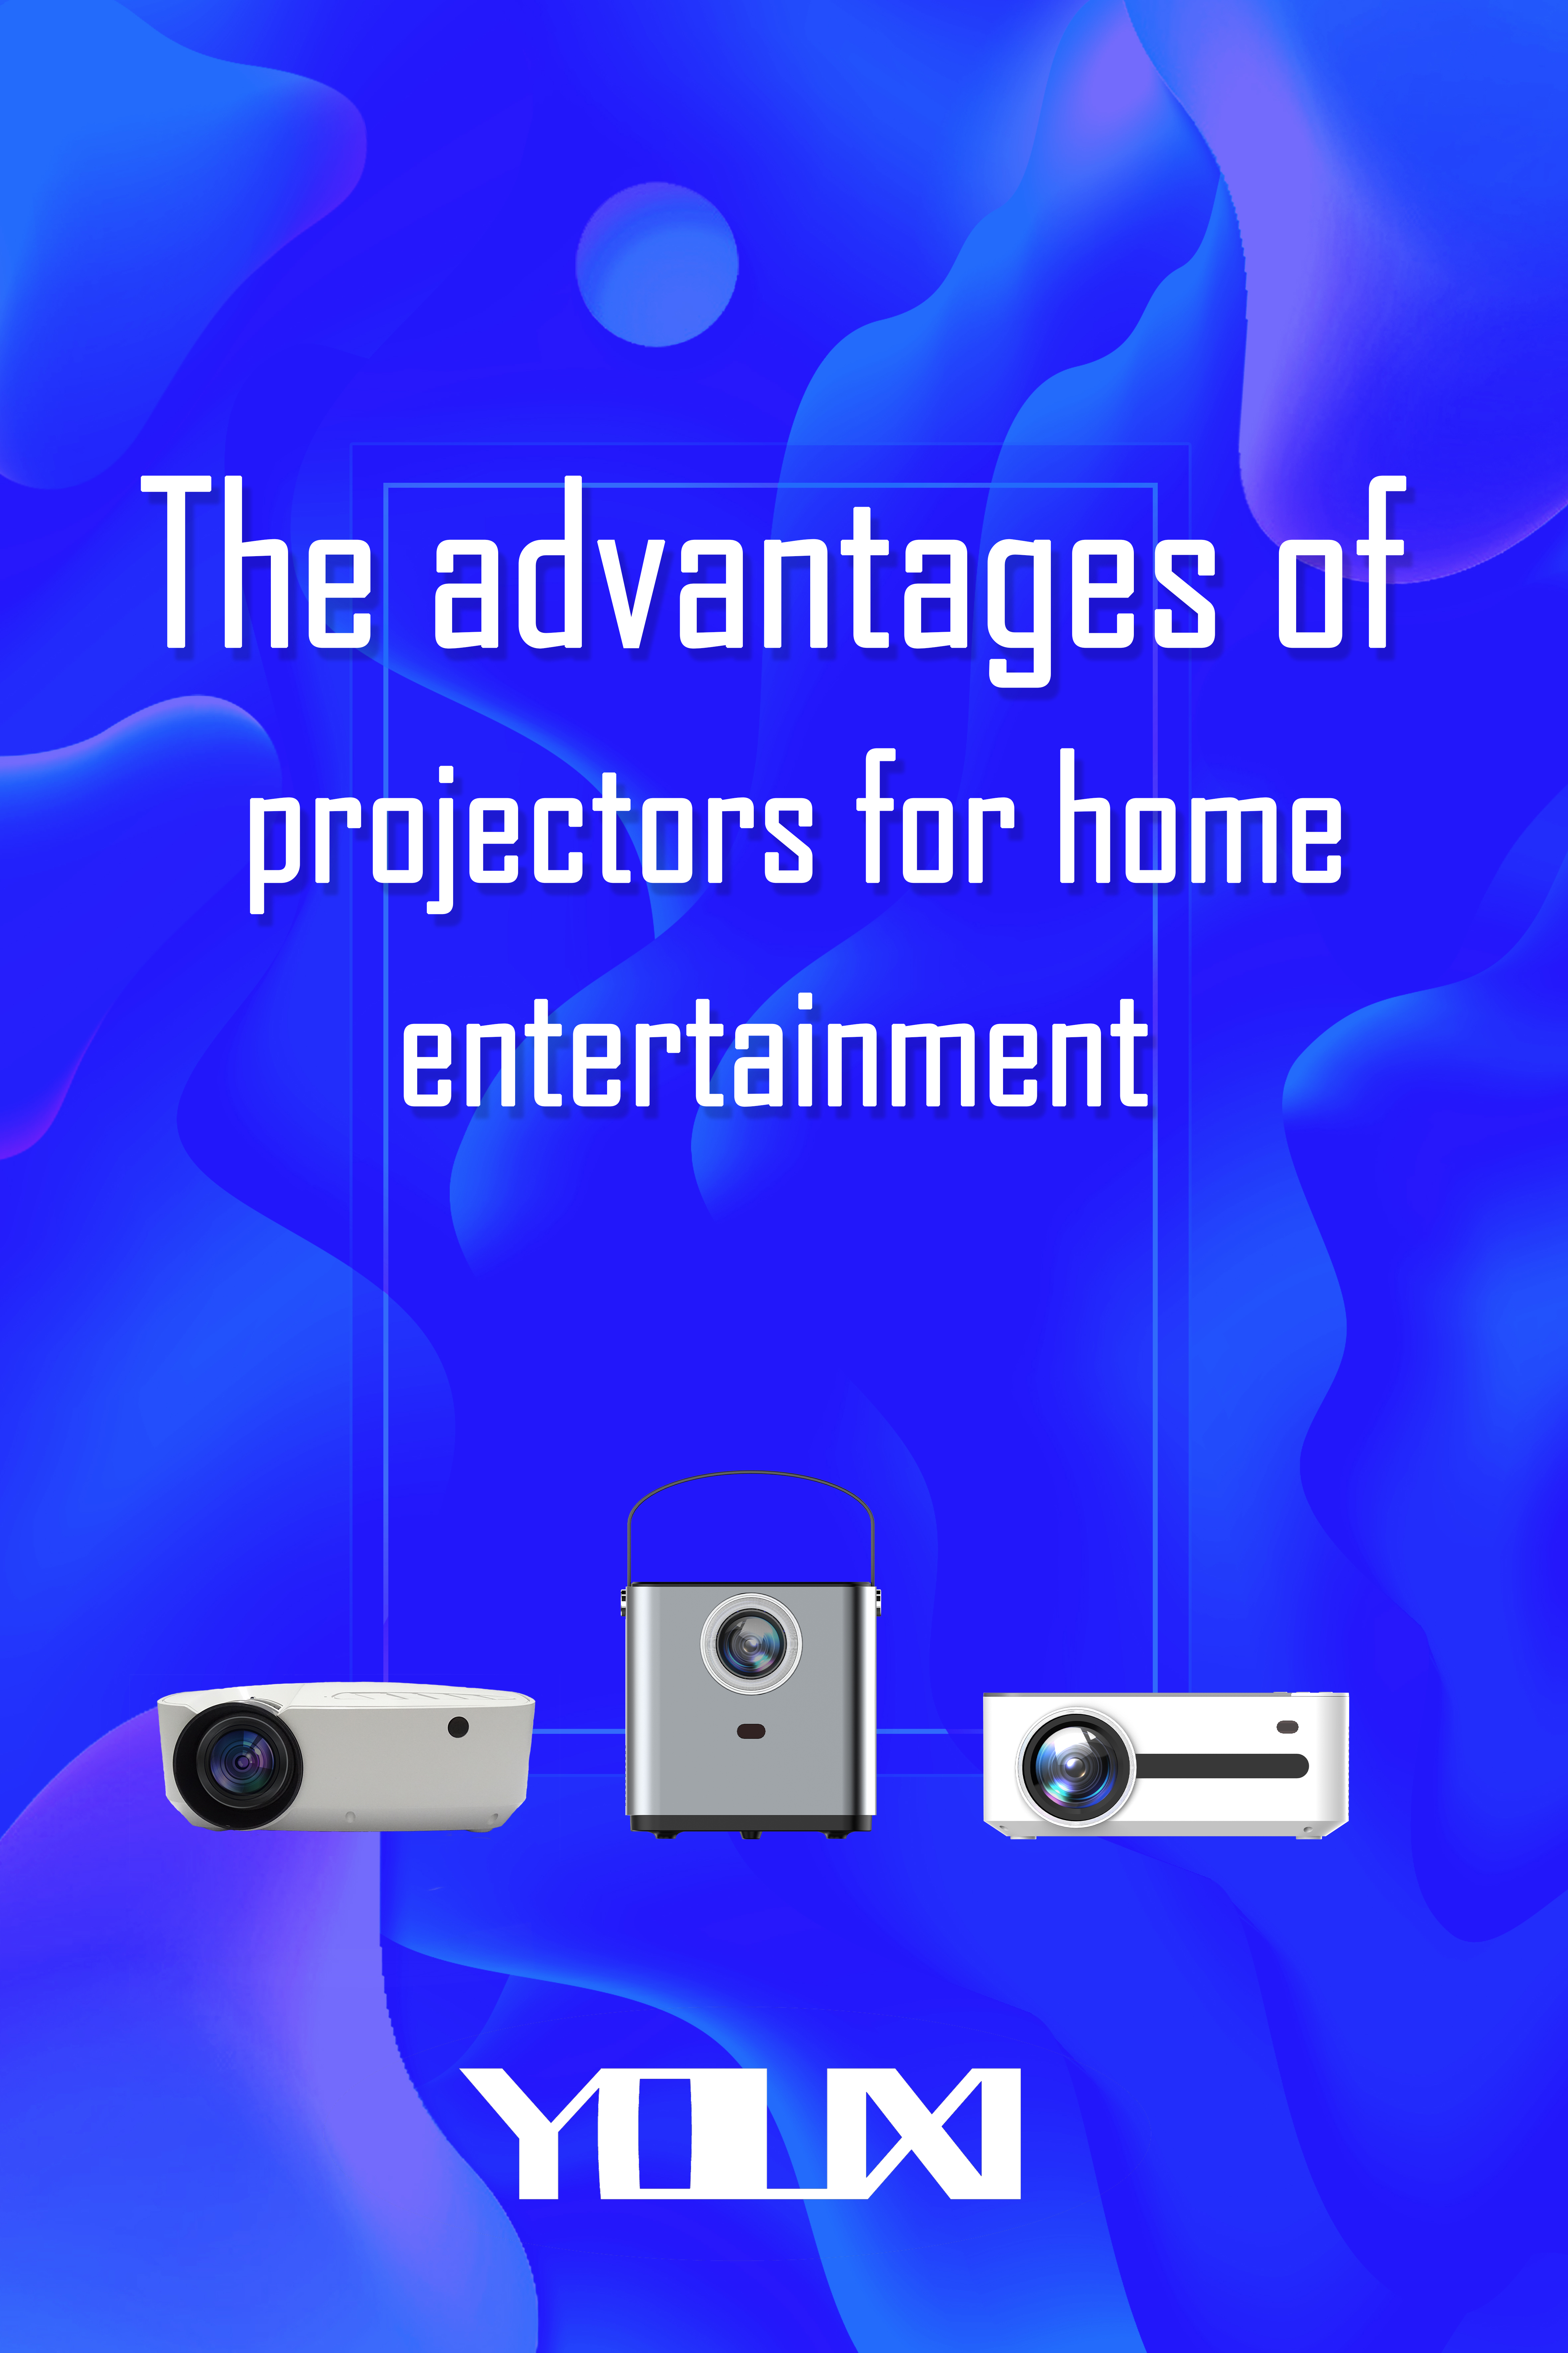 The advantages of projectors for home entertainment